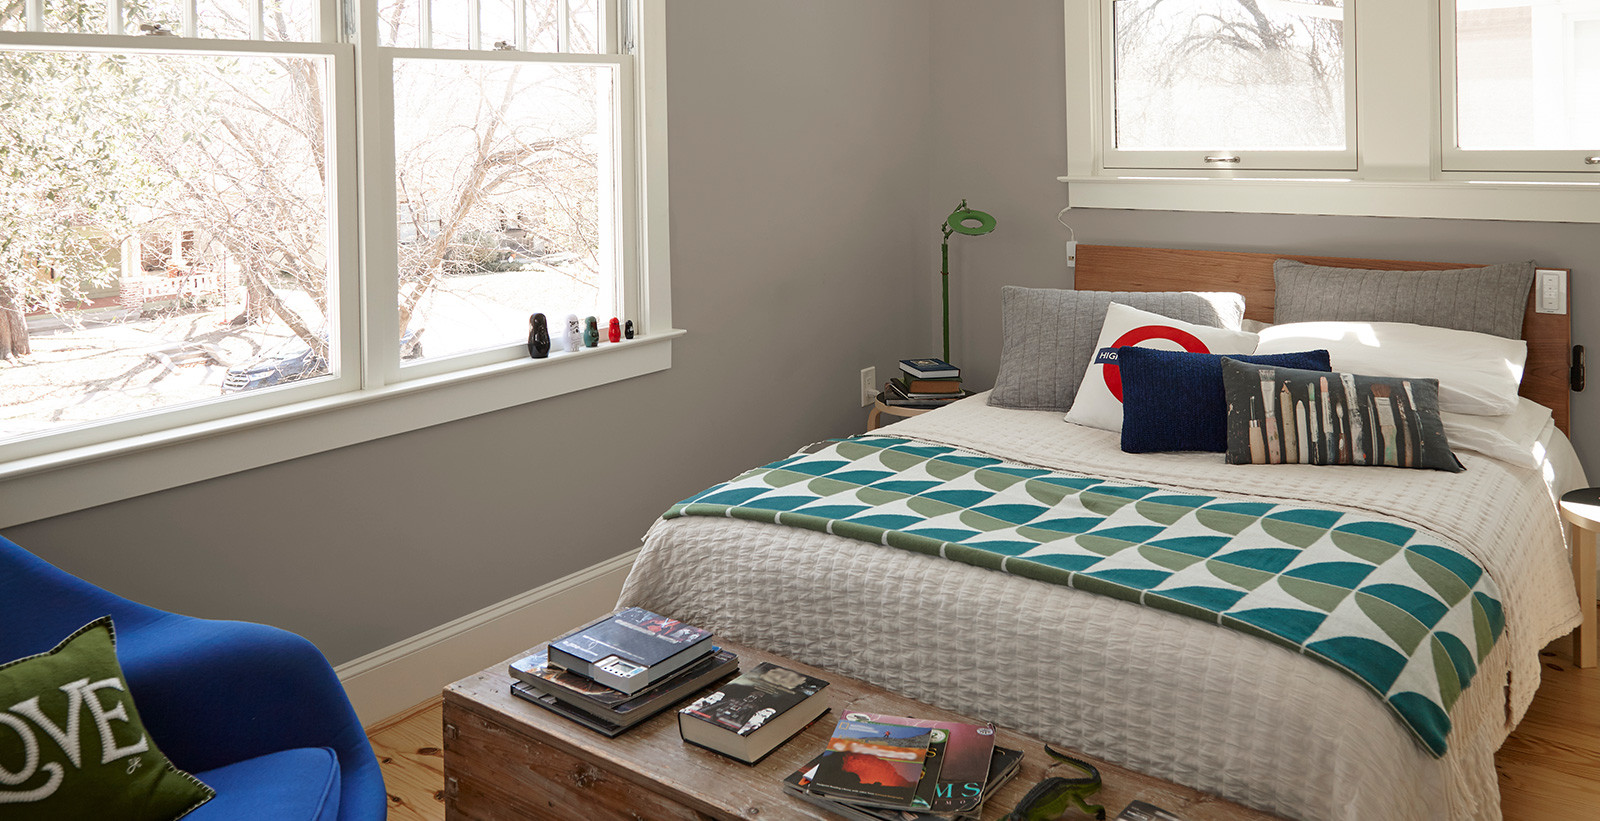 Behr Bedroom Colors
 Casual Bedroom Ideas and Inspirational Paint Colors